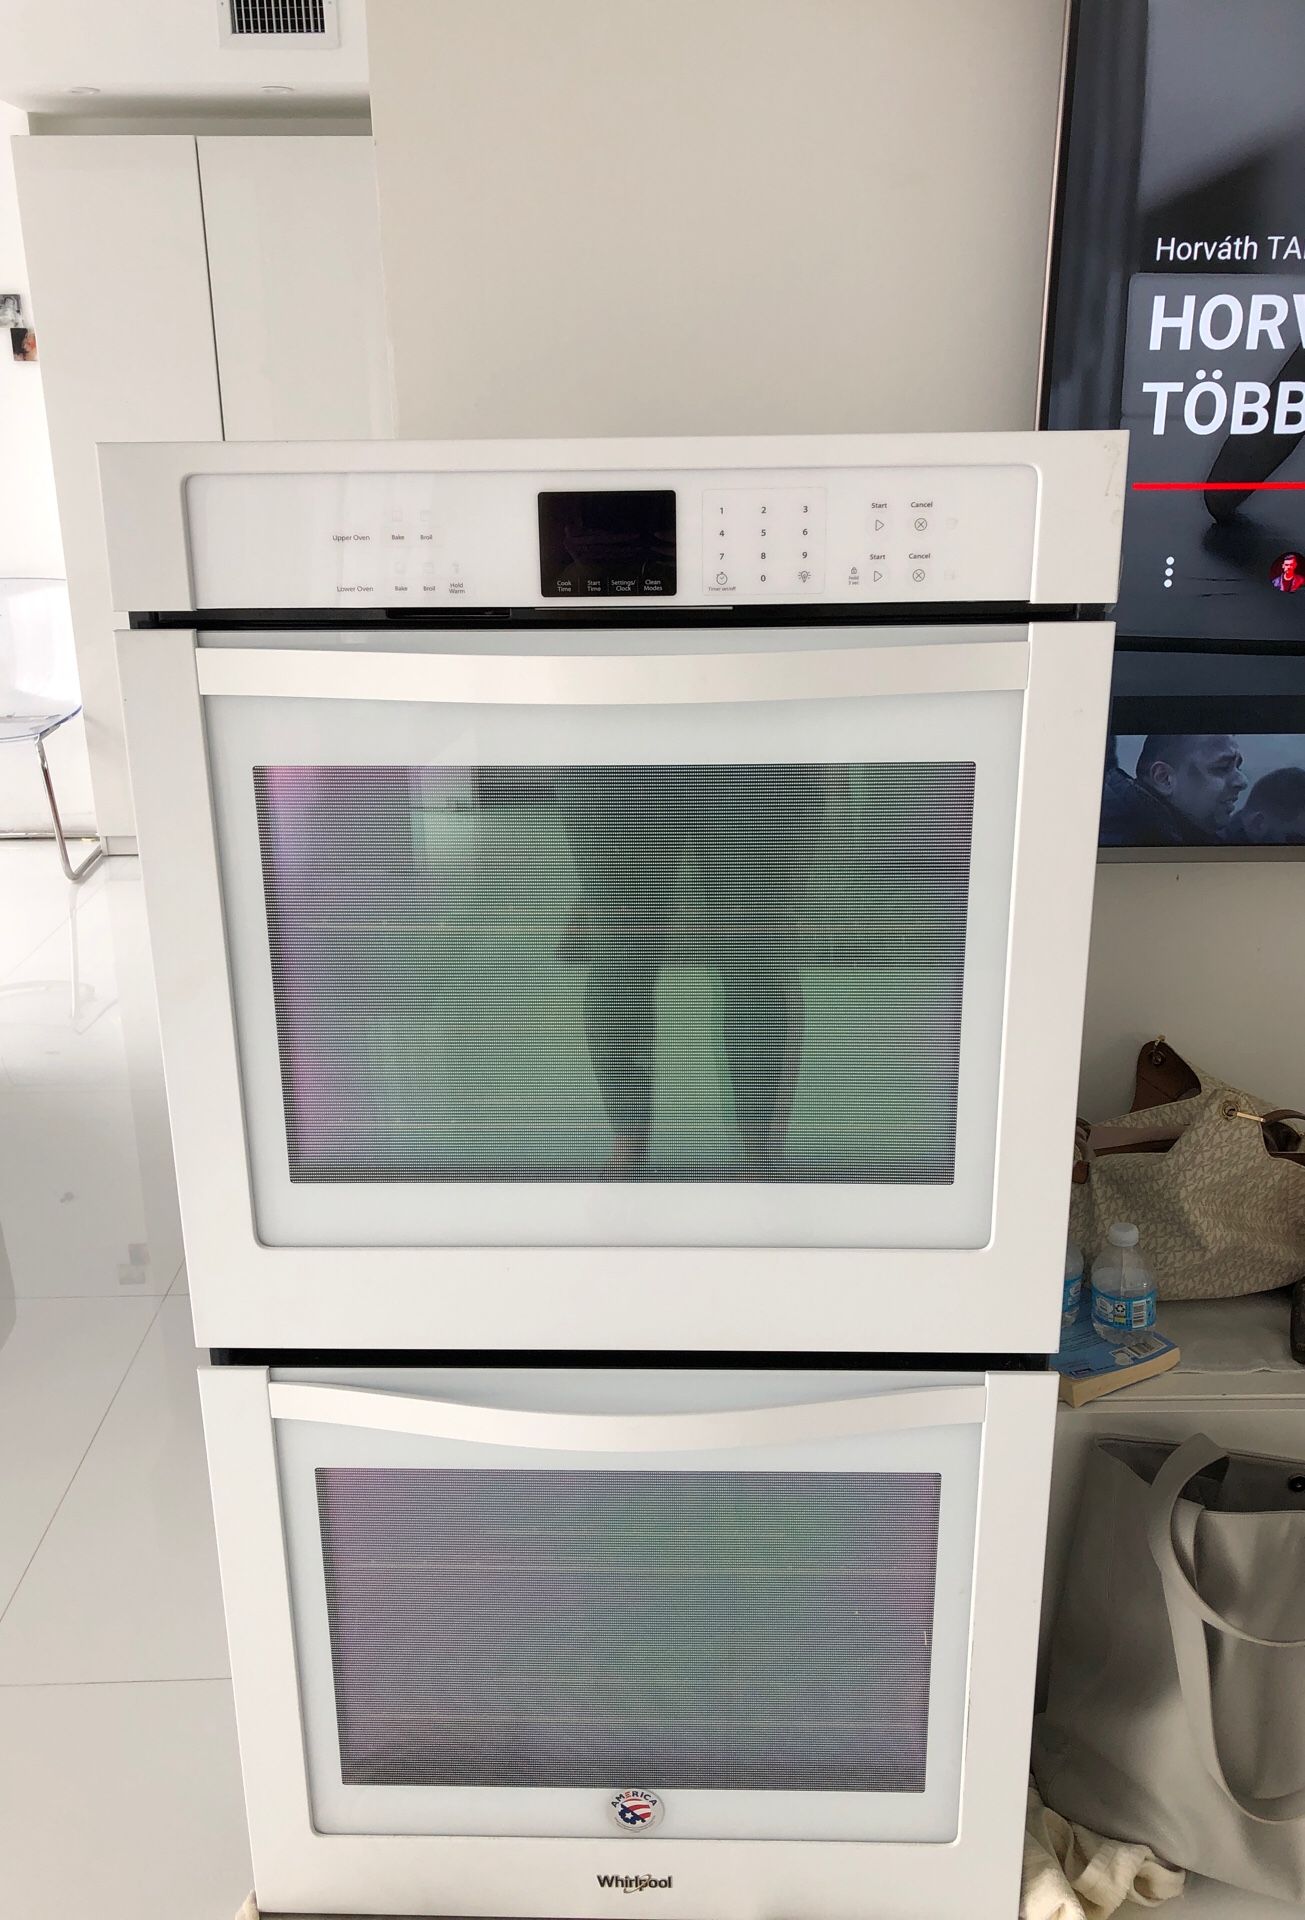 Brand new Whirlpool double oven 7/2019